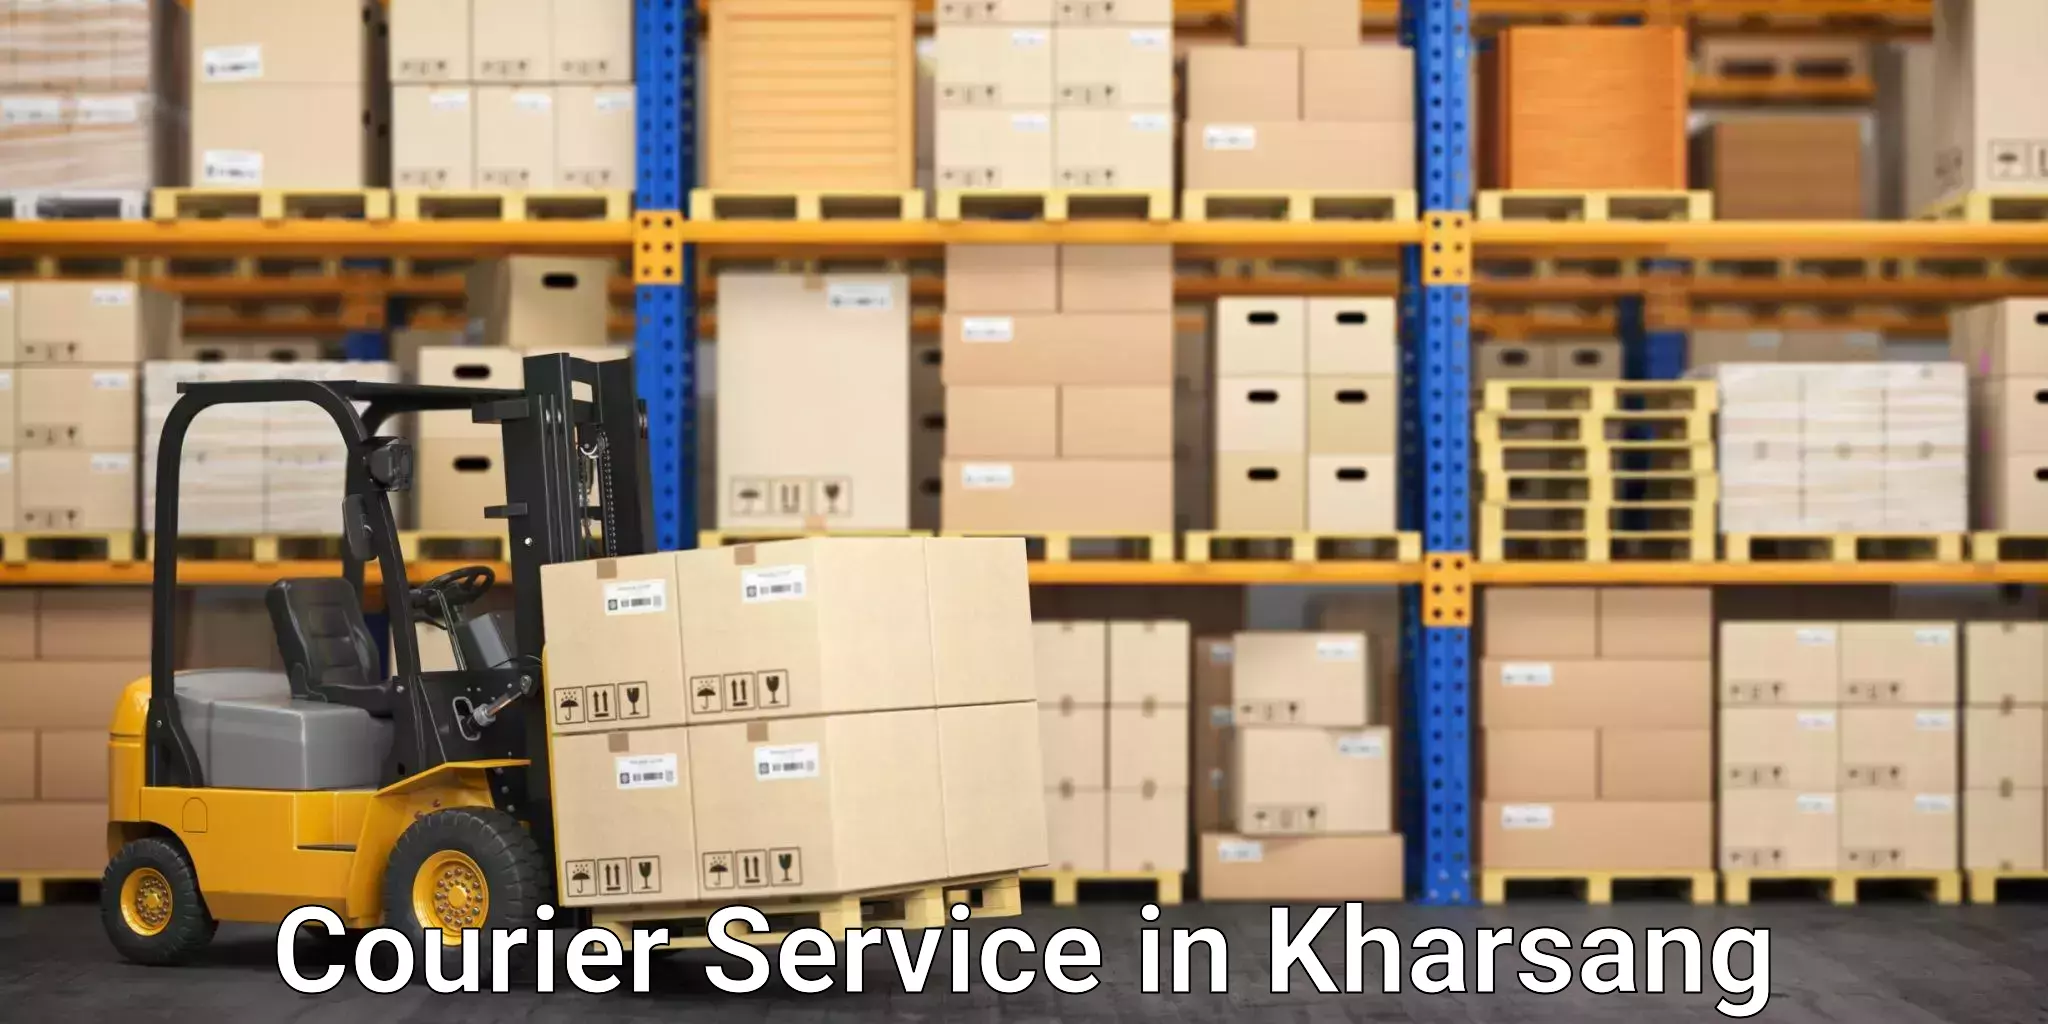 On-call courier service in Kharsang